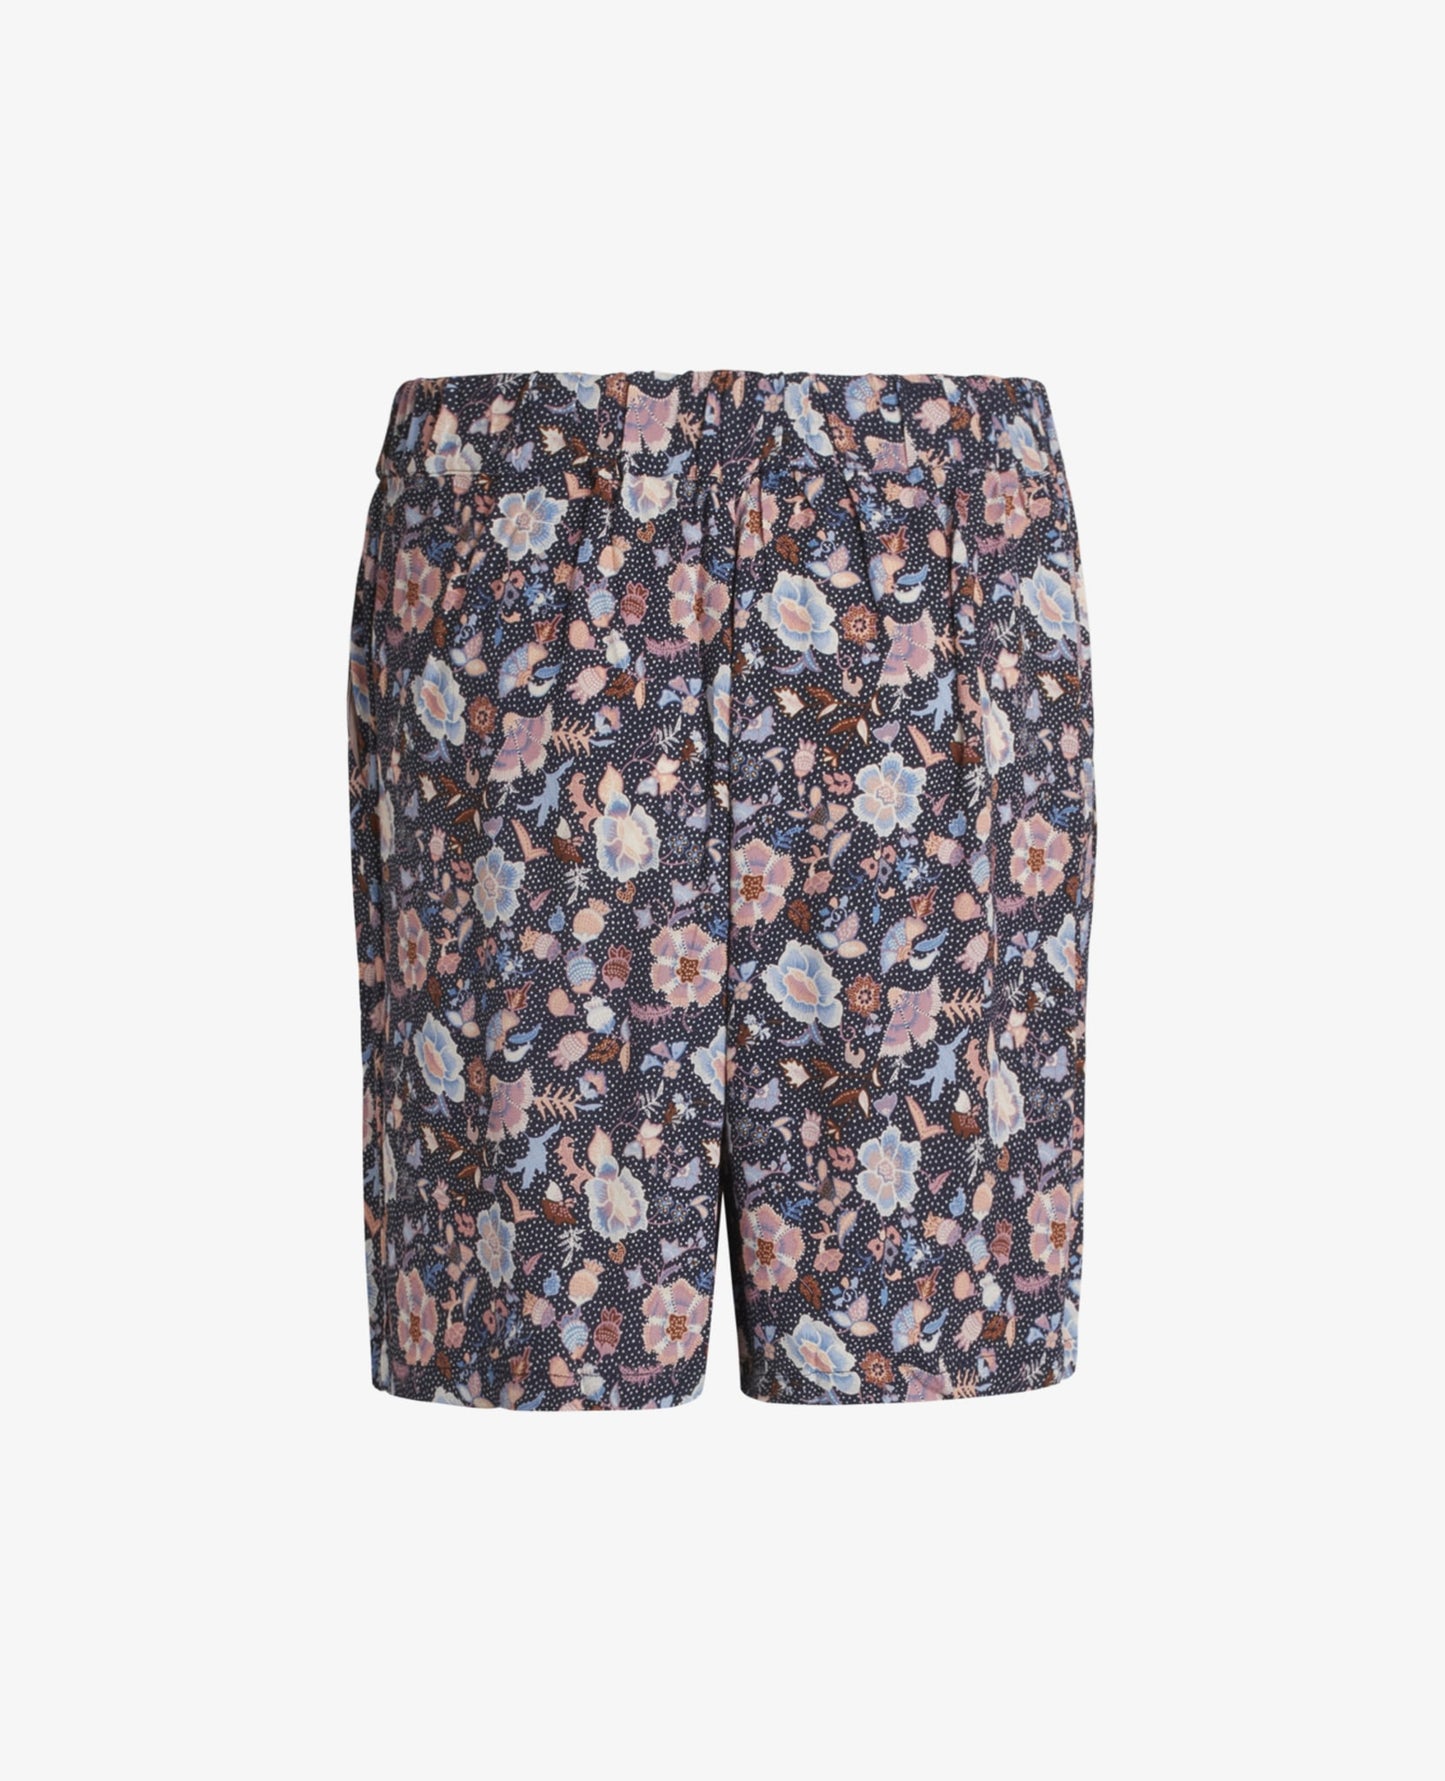 FLORAL MOSS SHORTS